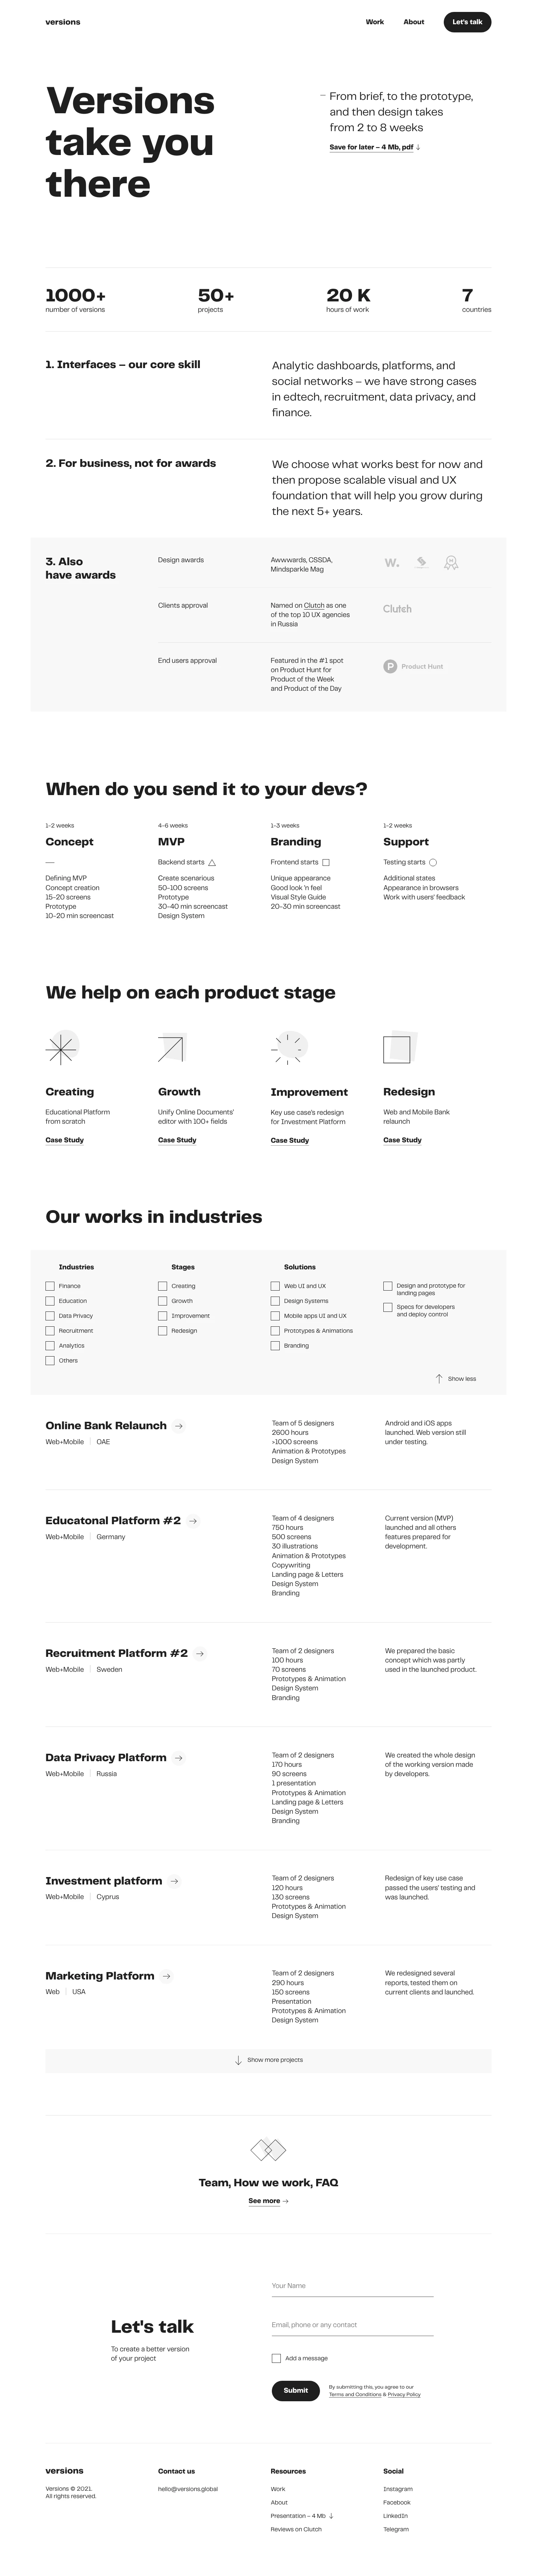 Versions Landing Page Example: From the brief to the prototype and then to the design - from 2 to 8 weeks. Edtech, recruitment, data privacy, analytics and finance.